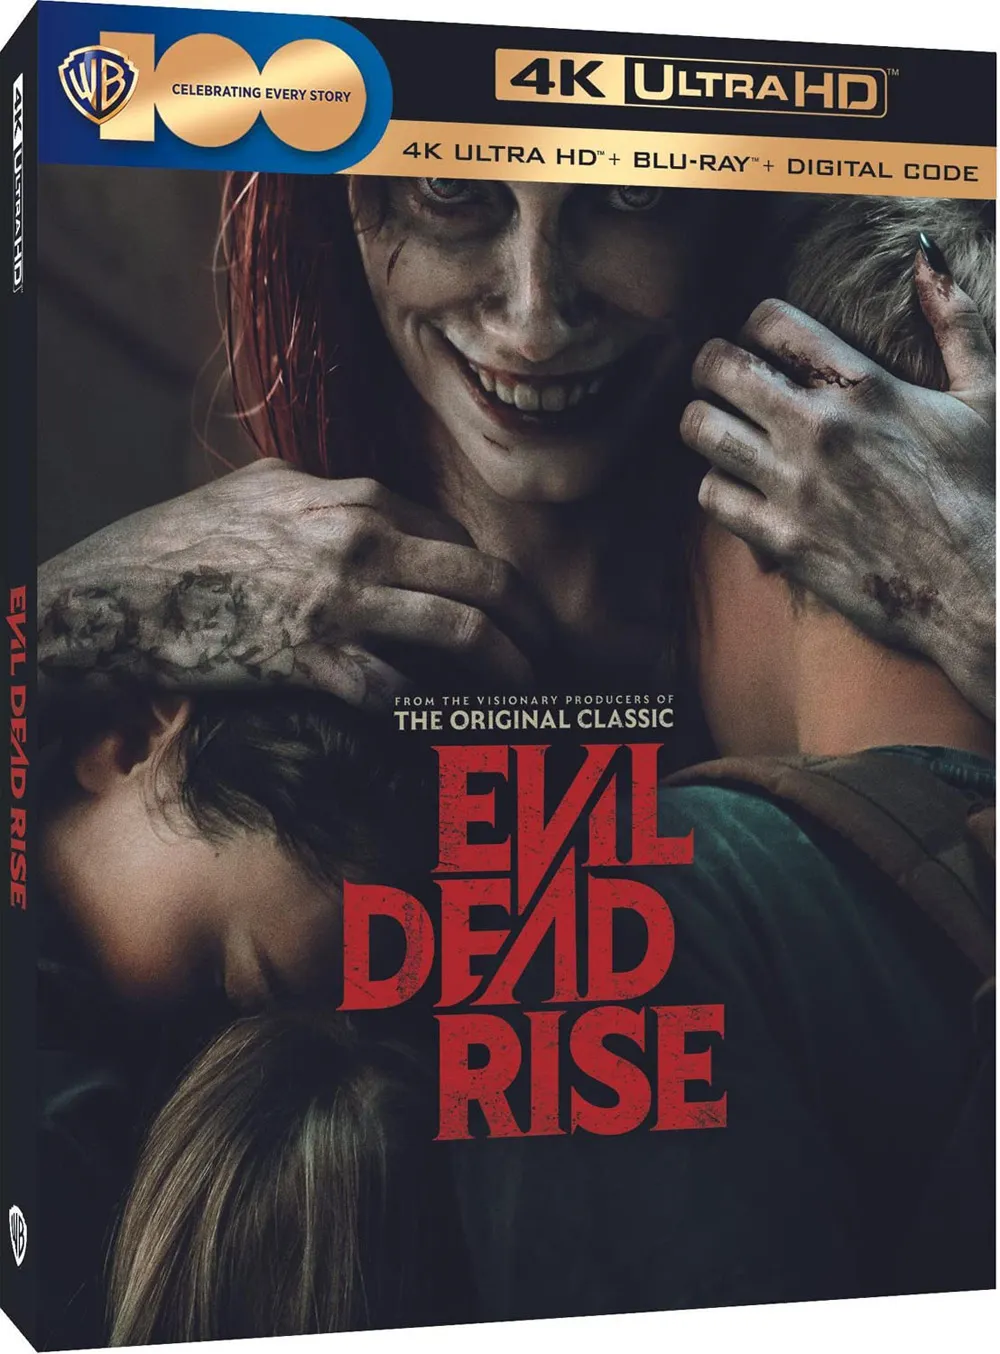 'Evil Dead Rise' Gets 4K UHD, Bluray and DVD Release Date